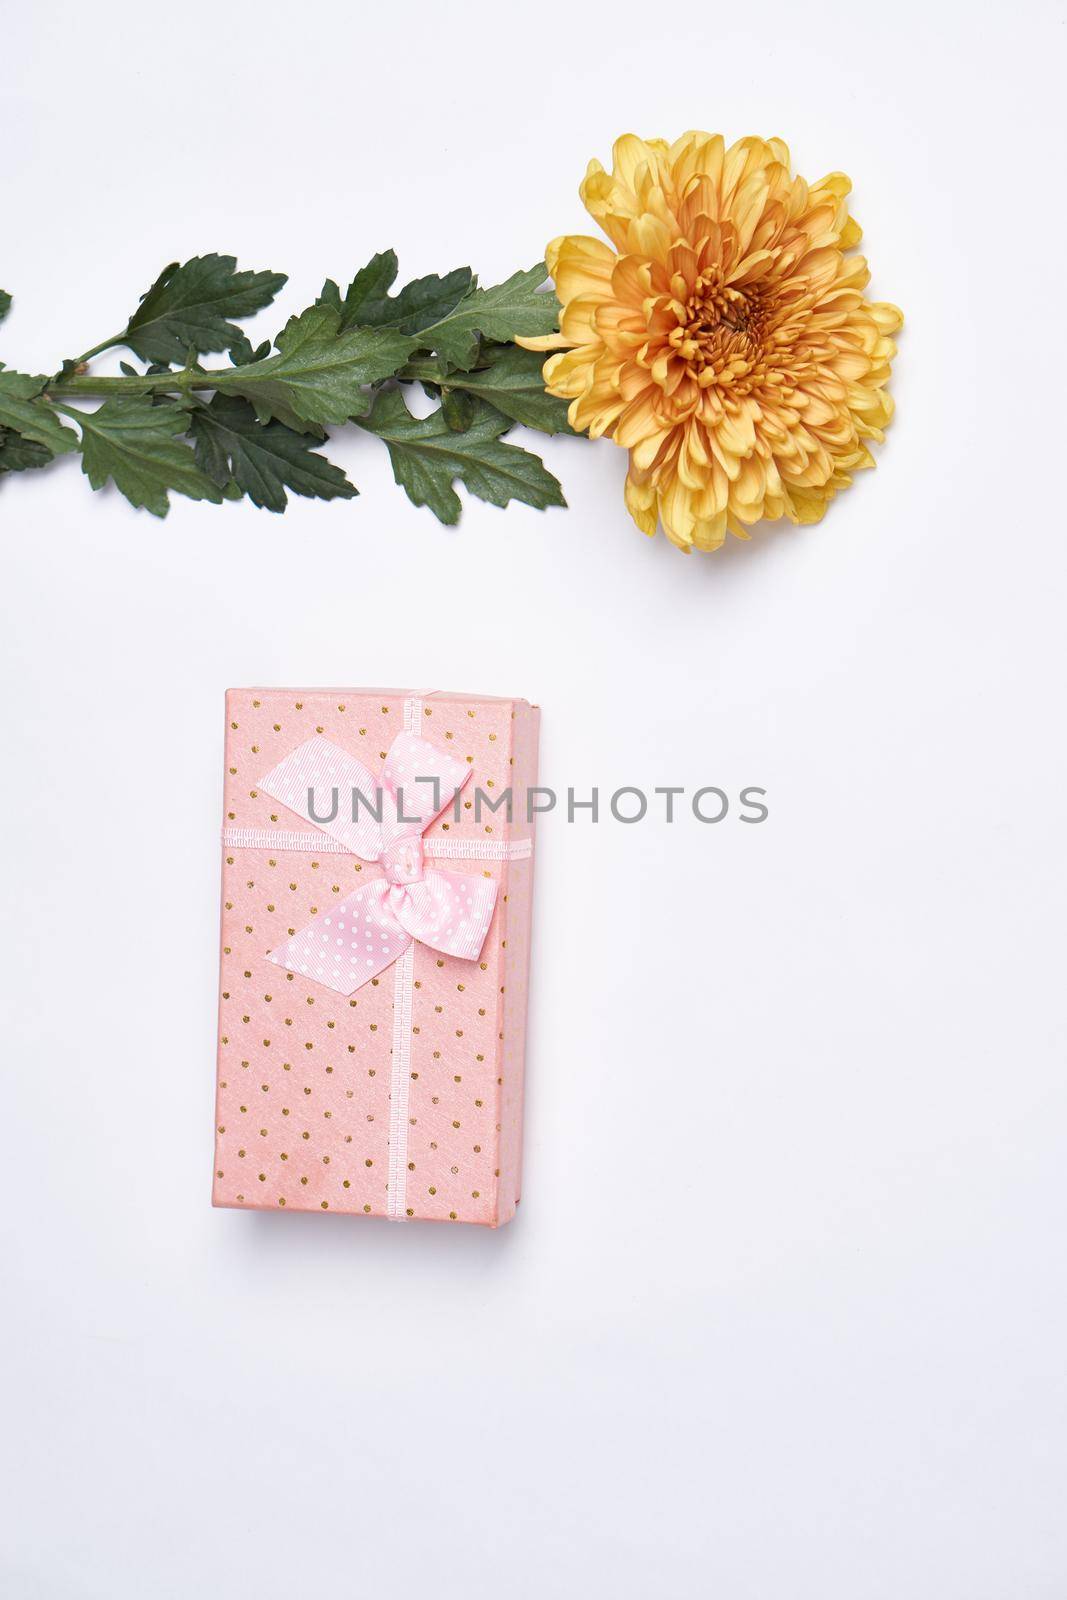 pink box flower bouquet decoration holiday birthday light background. High quality photo